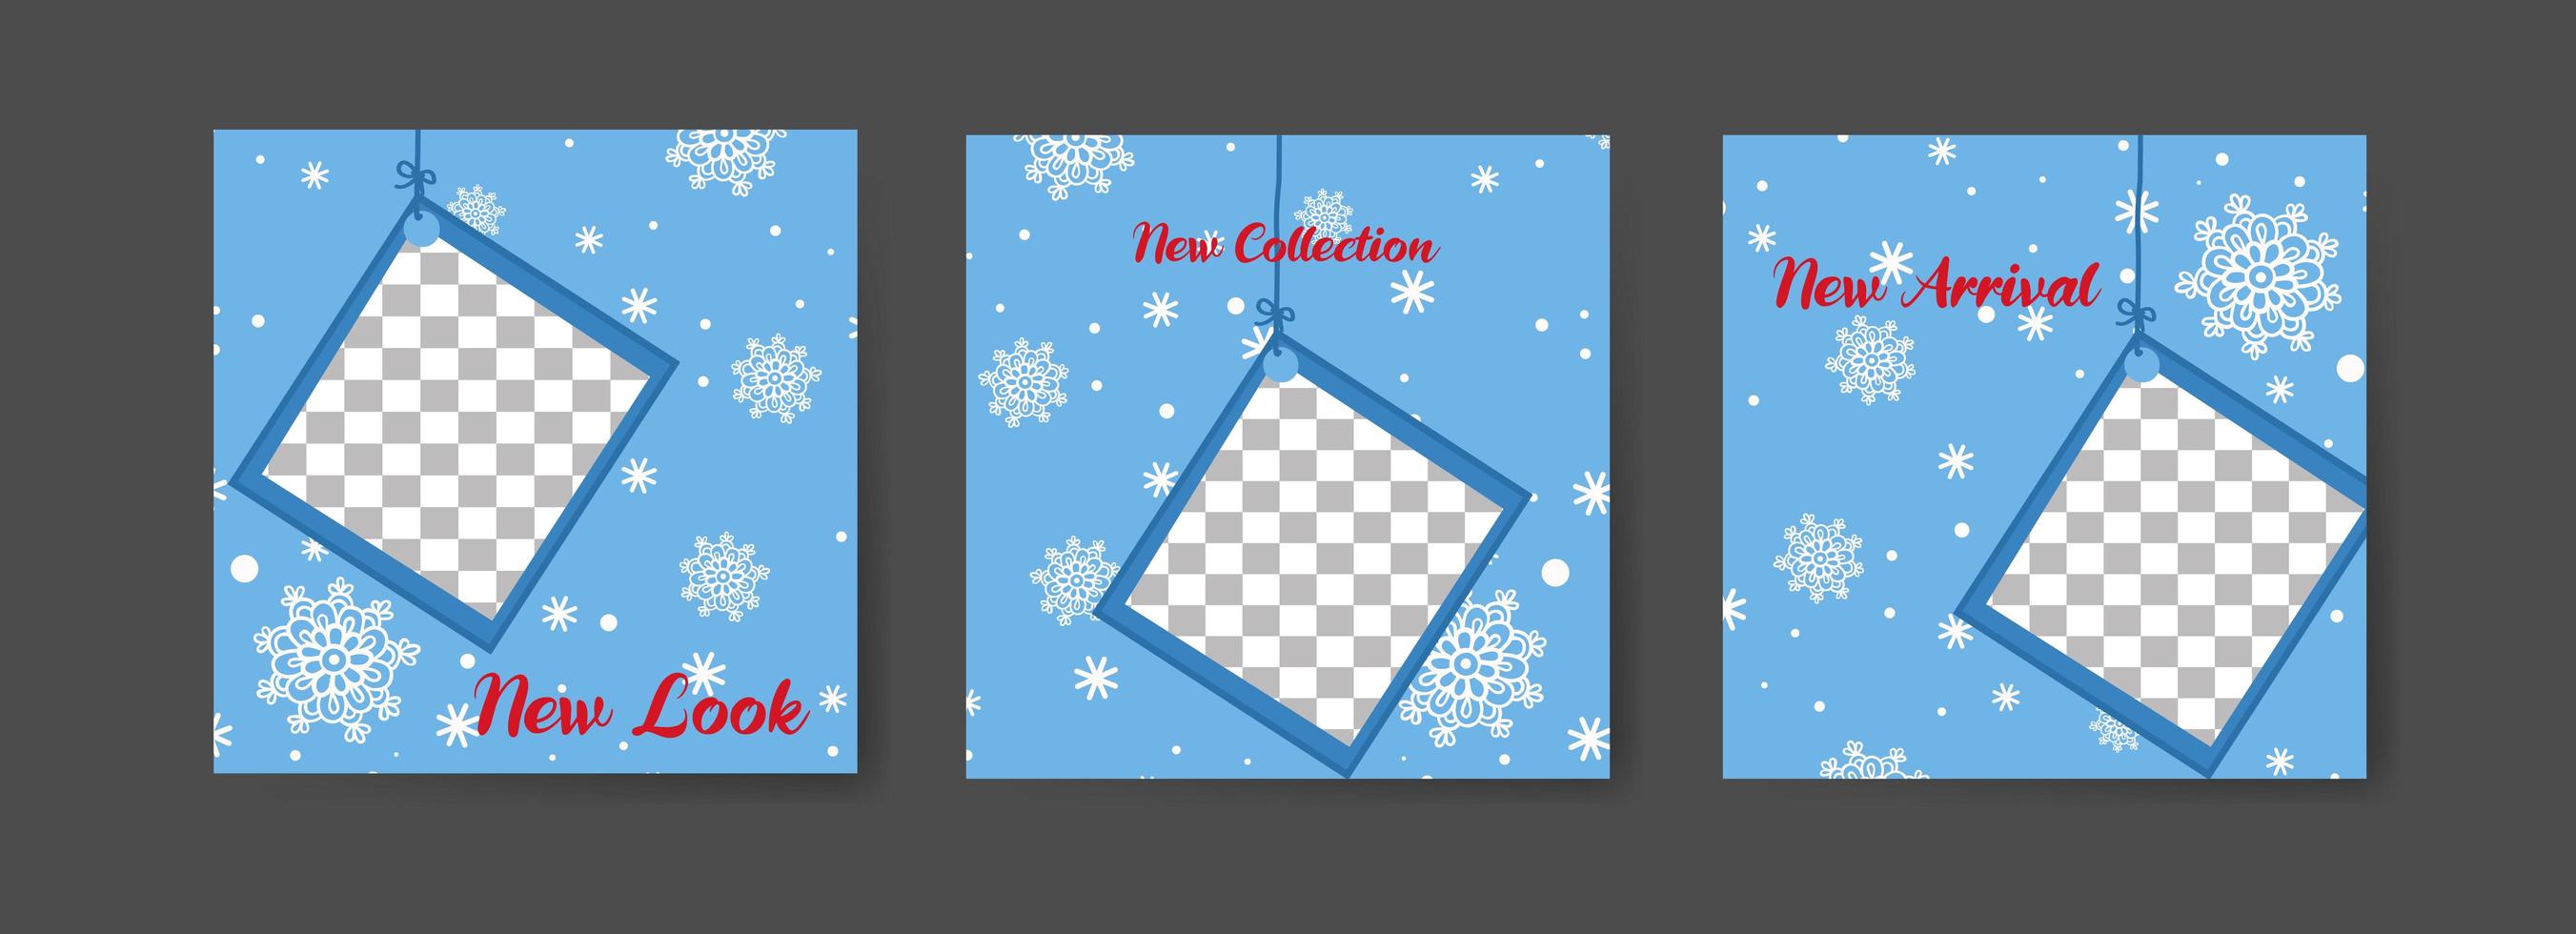 Social media post templates with winter photo theme vector